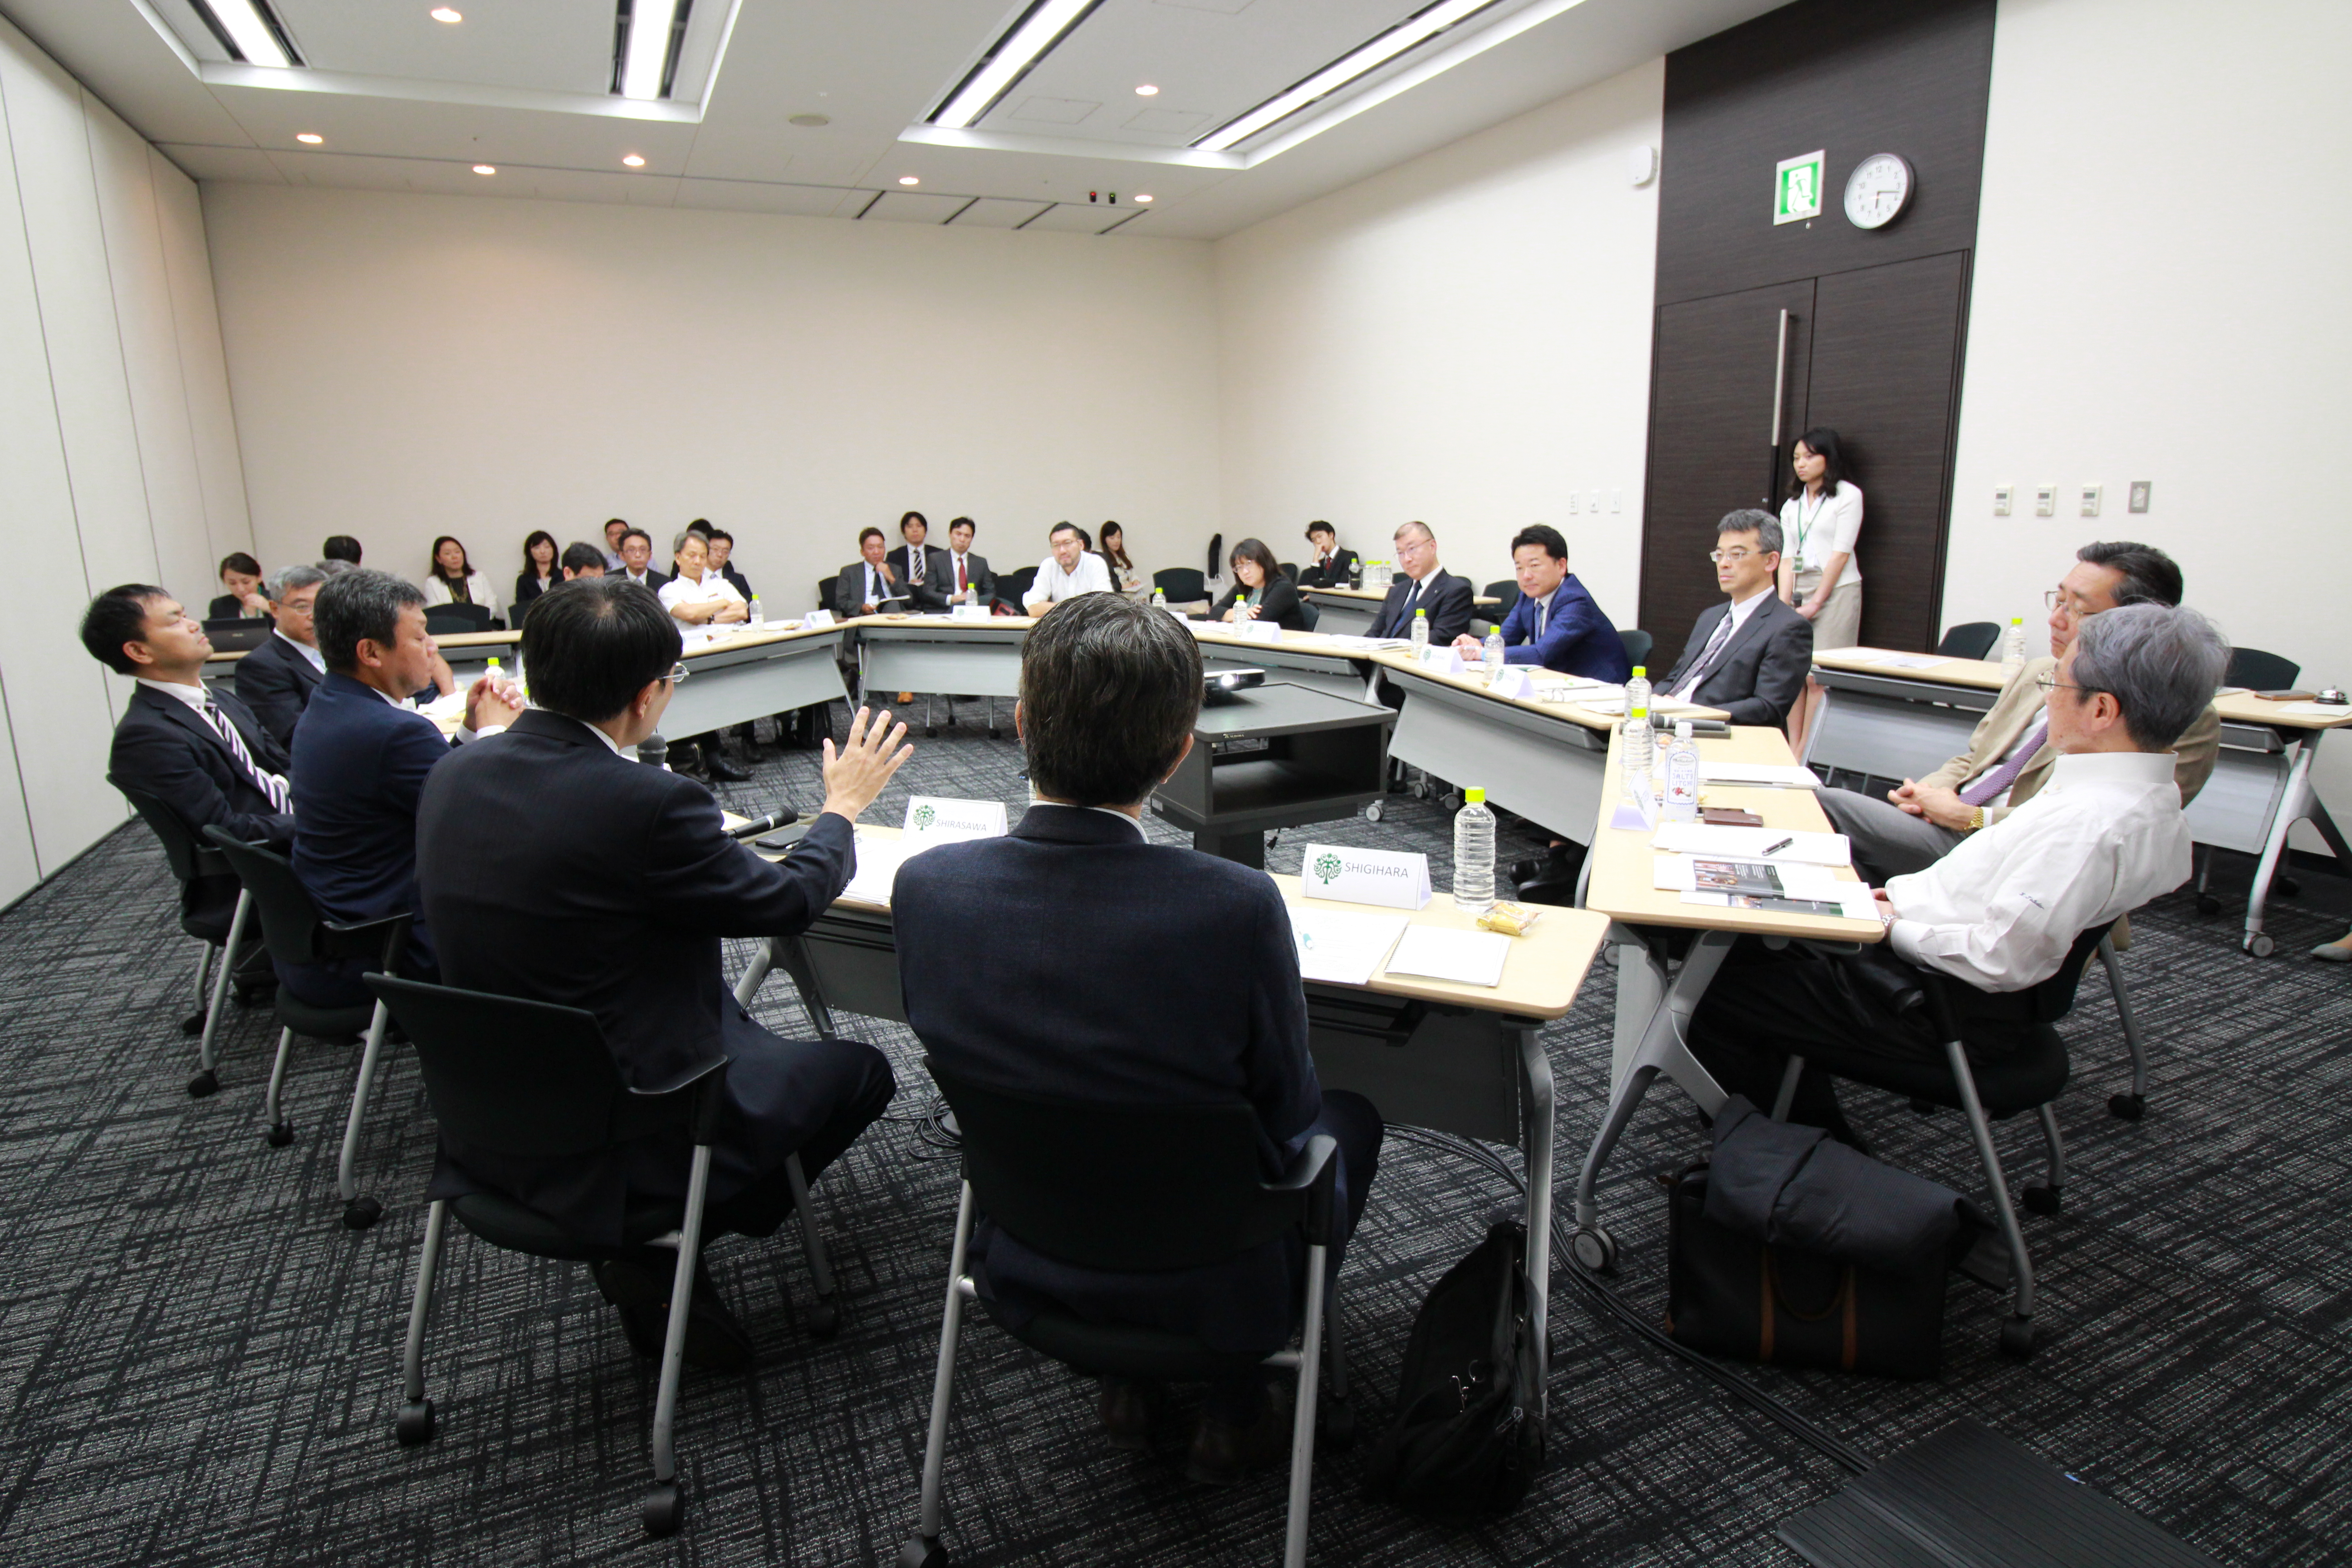 [Event report] AMR Alliance Japan – Kick-off Meeting: Setting the vision (September 06, 2018)